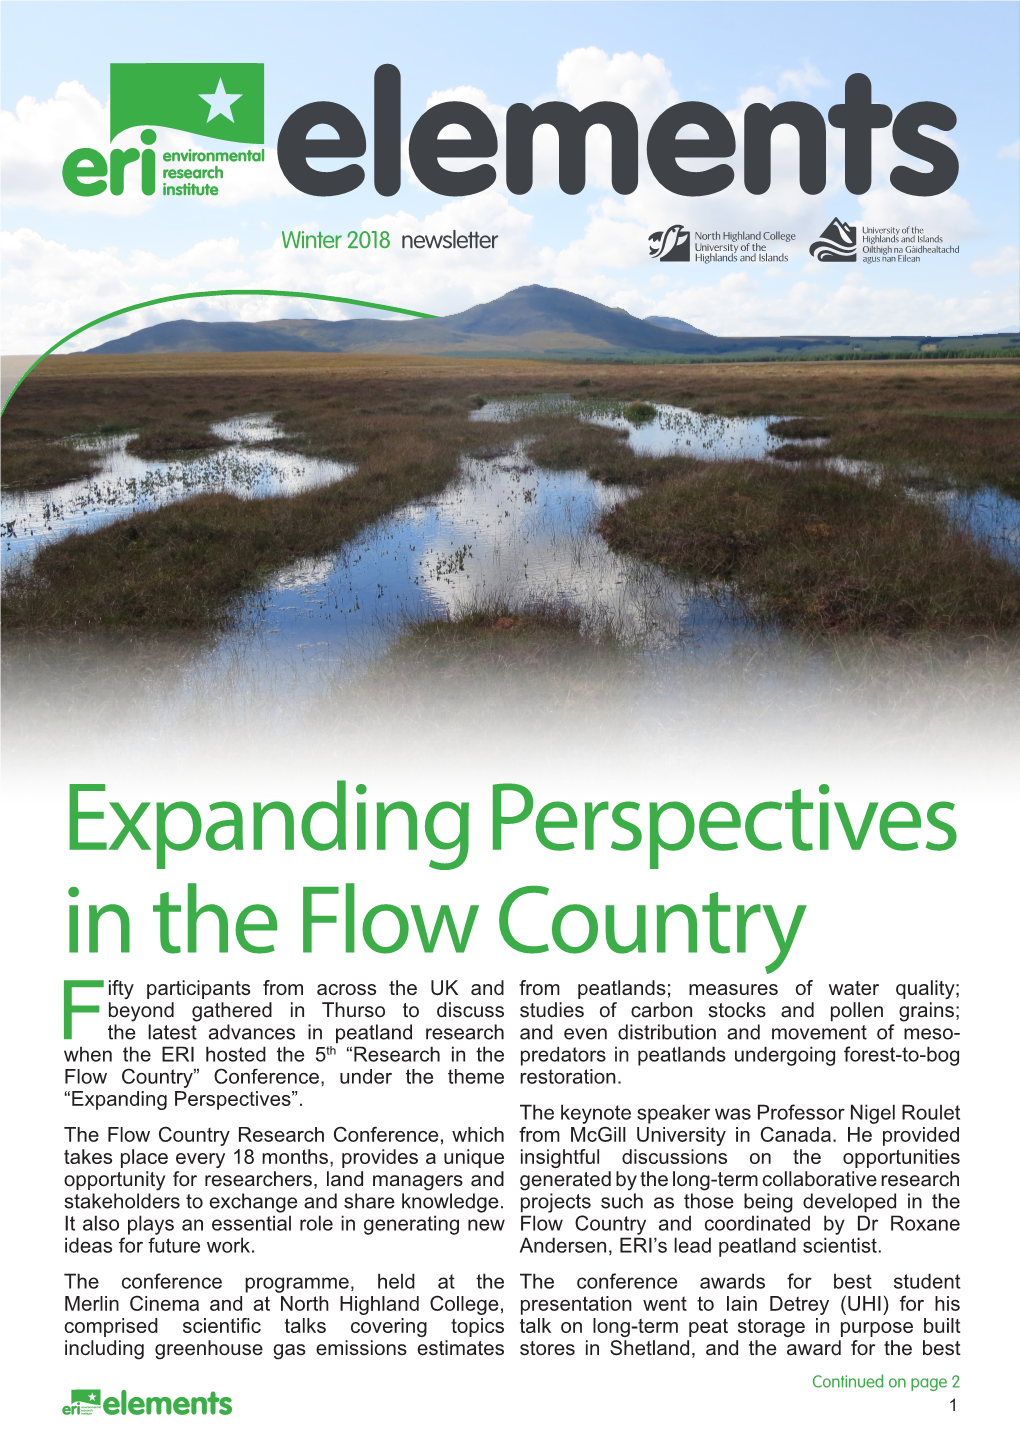 Expanding Perspectives in the Flow Country